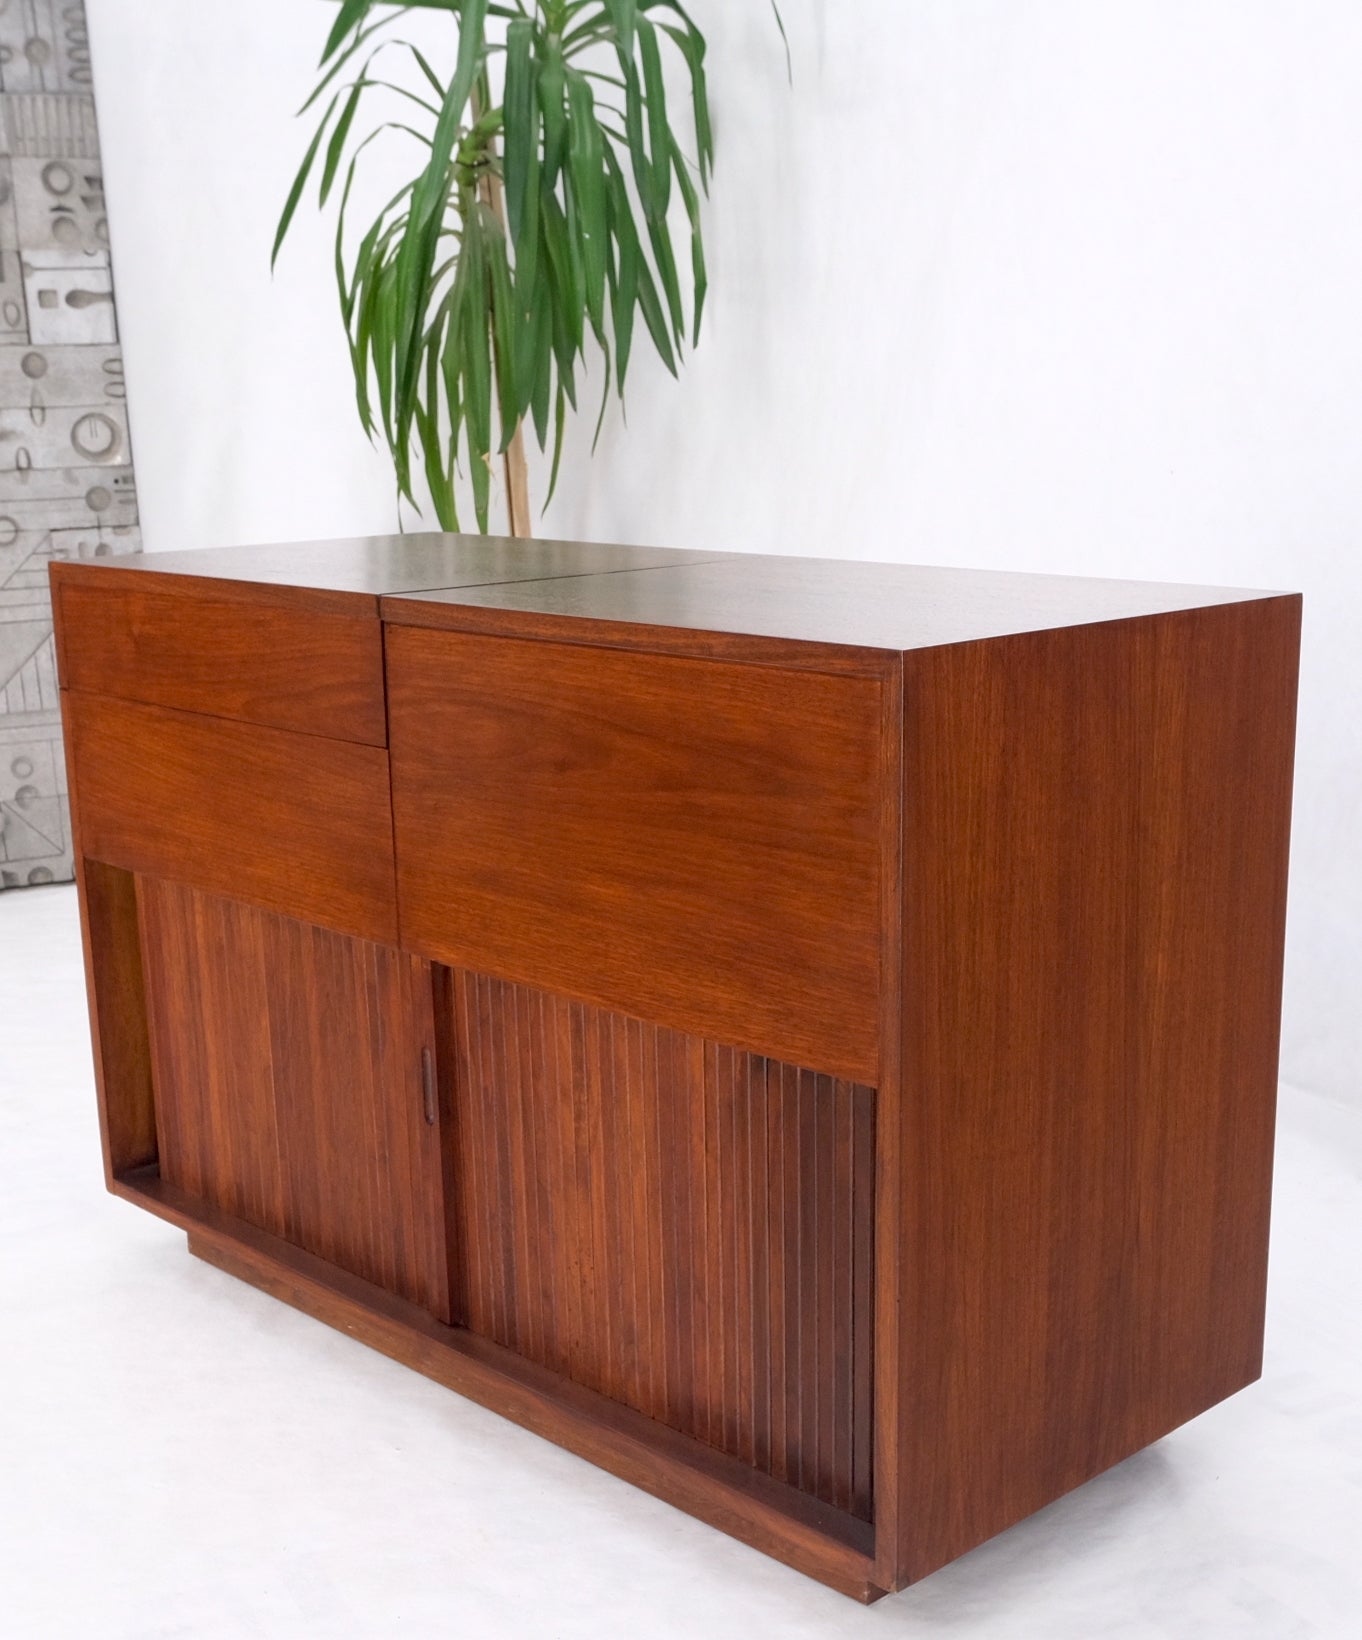 Restored lift top turn table record cabinet credenza tambour door compartment MINT!.